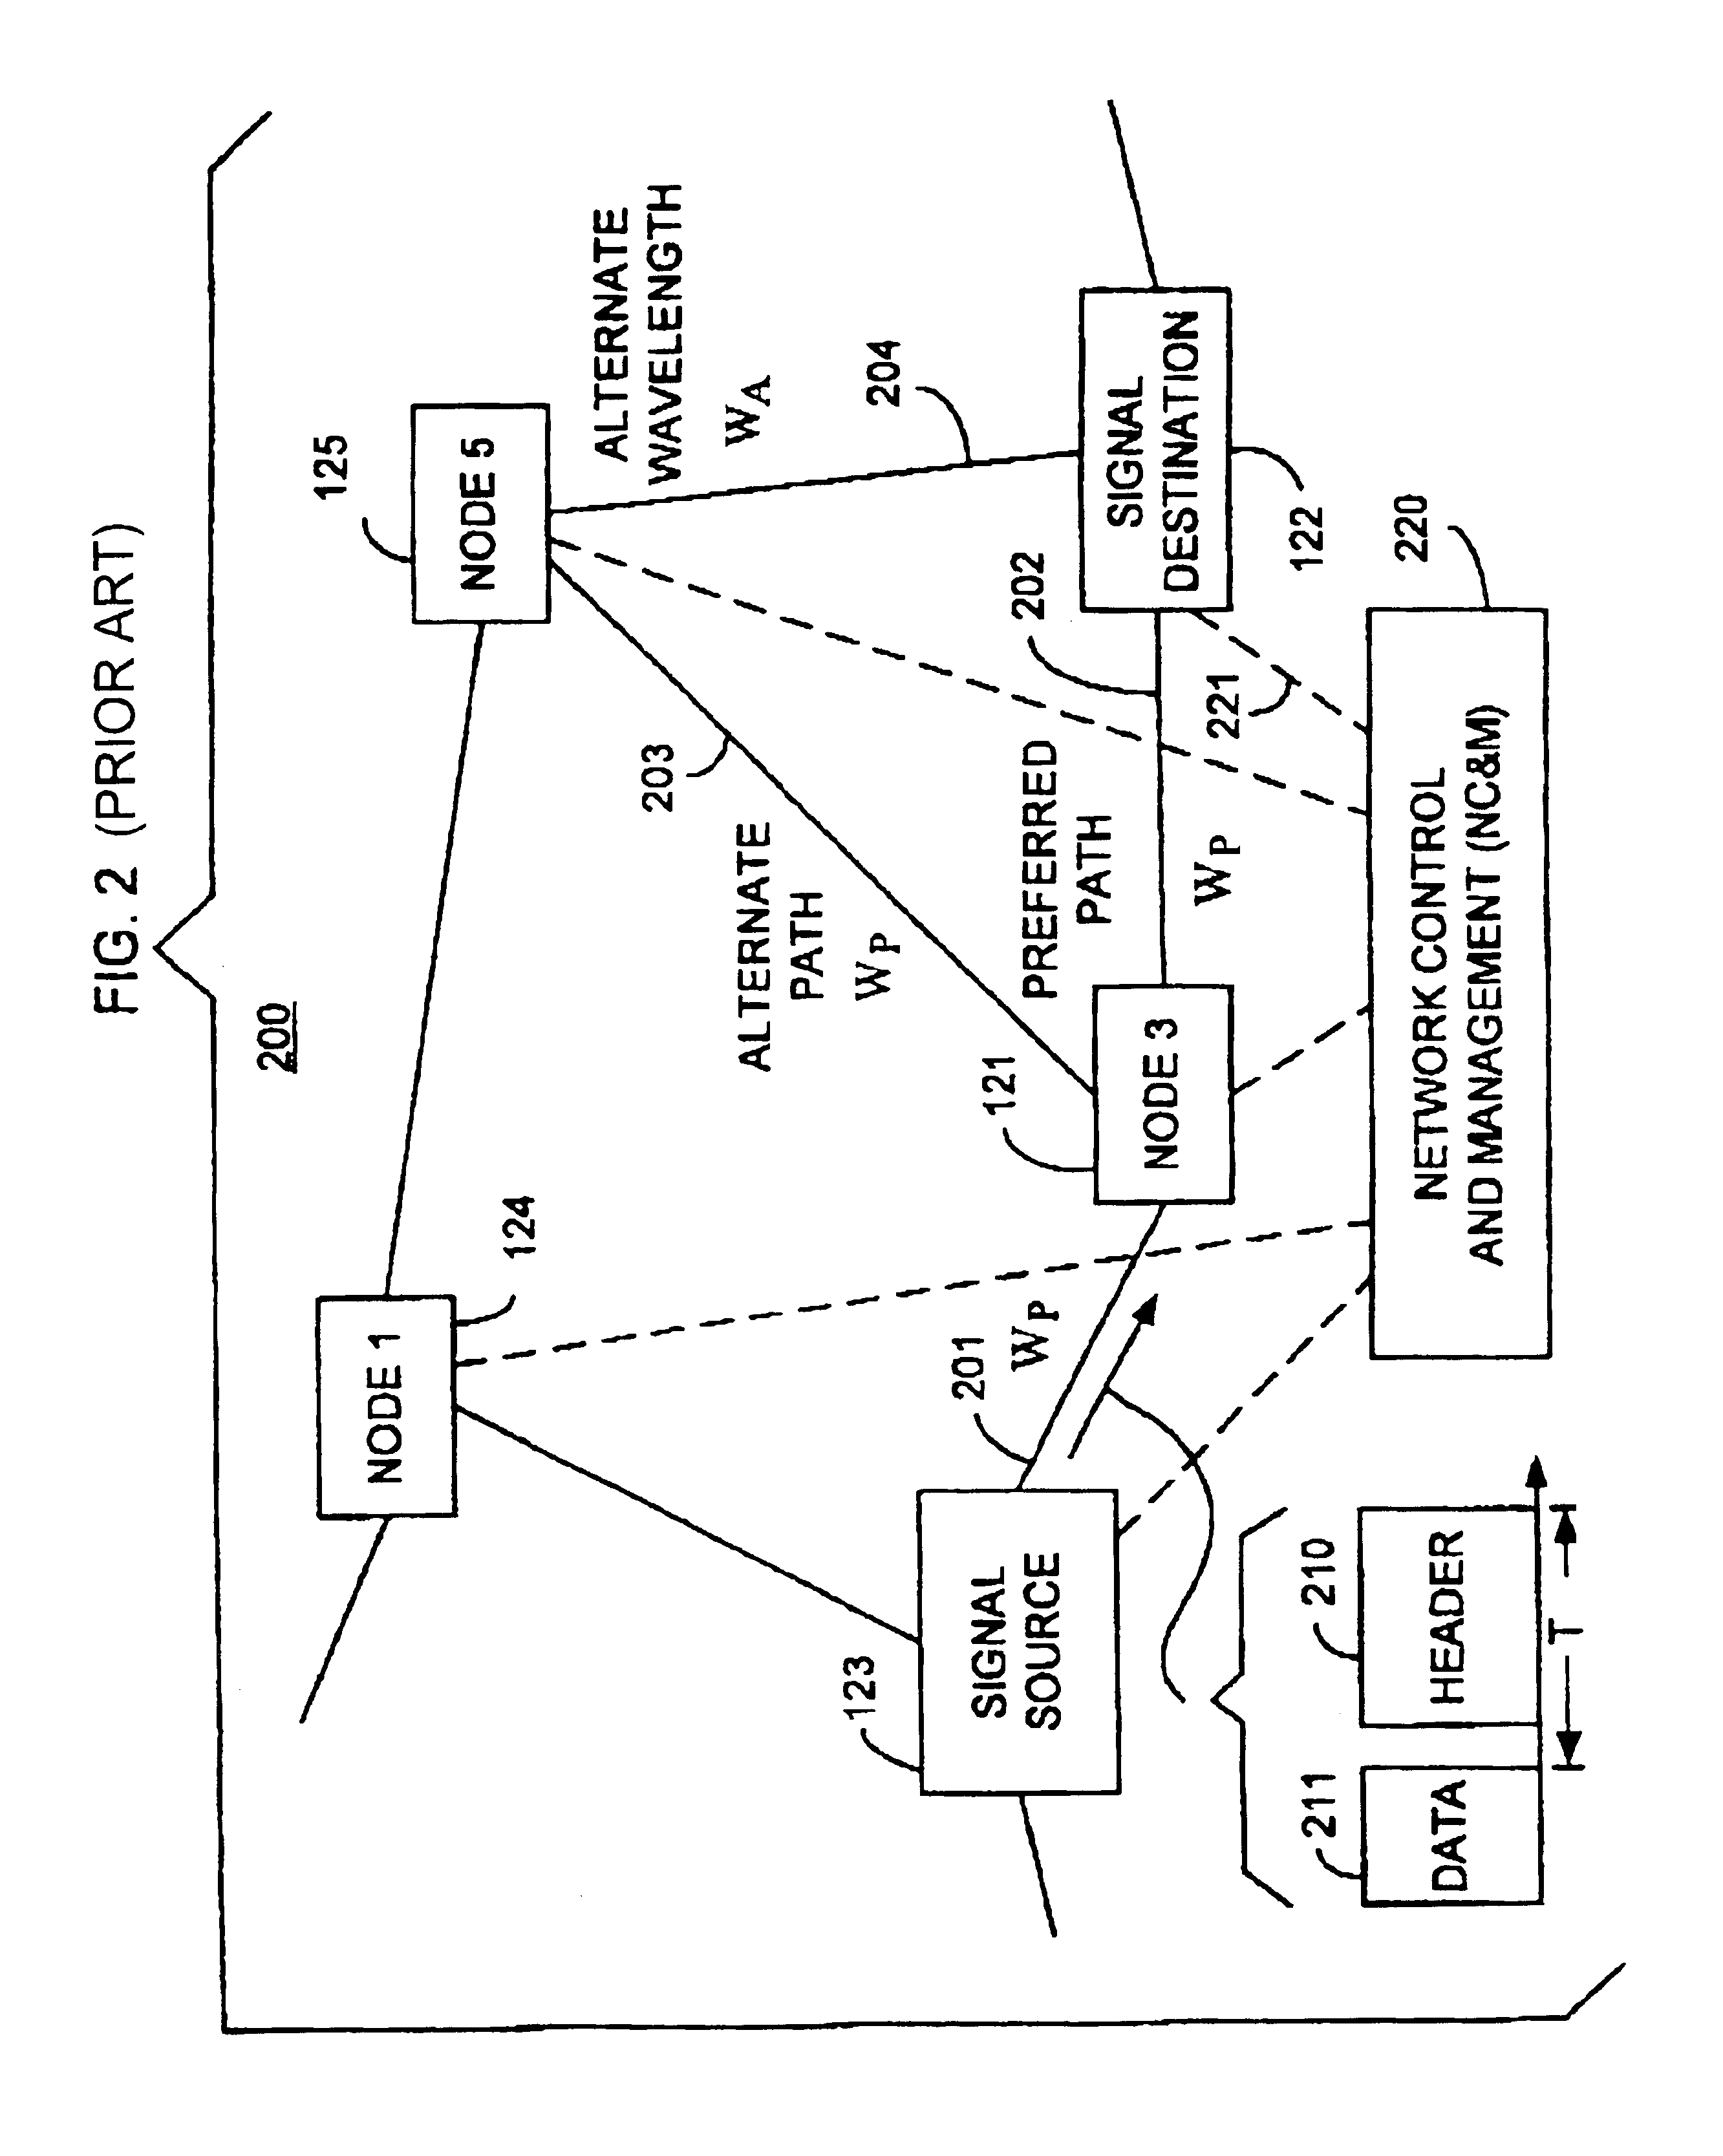 Optical layer multicasting